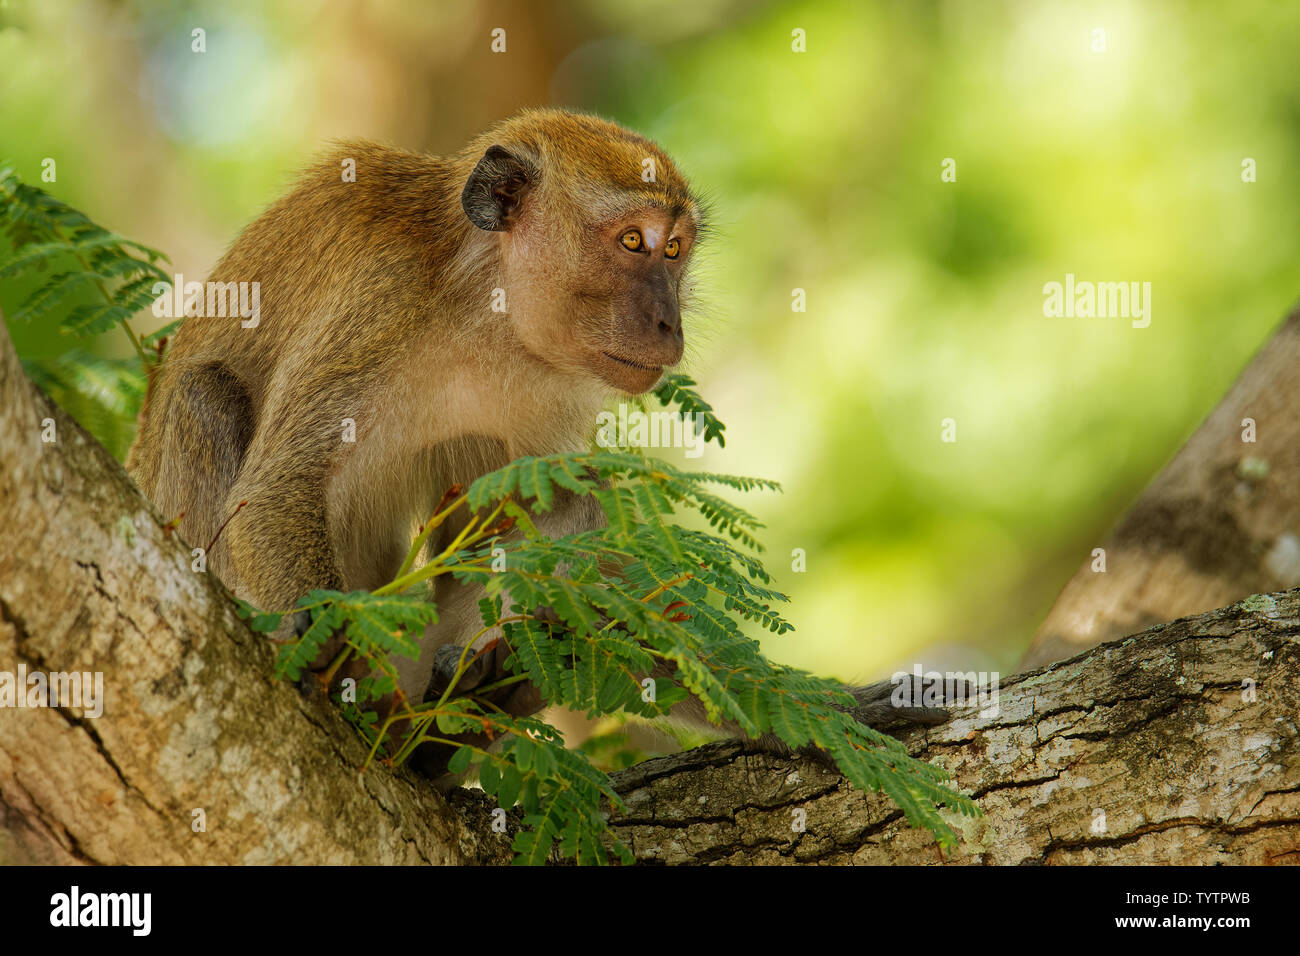 Long-tailed Macaque - Macaca fascicularis also known as crab-eating macaque, a cercopithecine primate native to Southeast Asia, is referred to as the Stock Photo